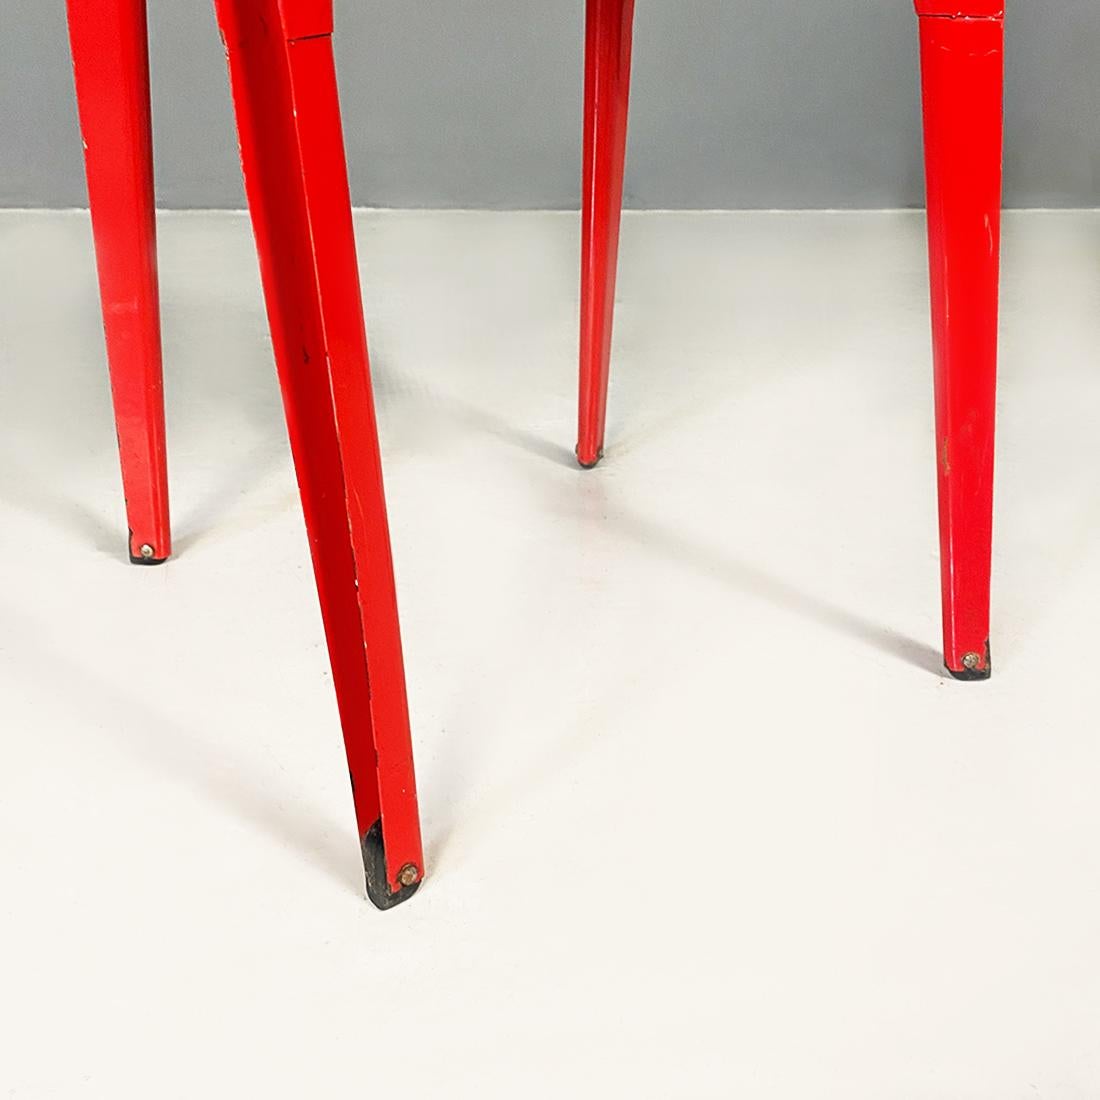 Italian modern red metal Lamda model chair by Marco Zanuso and Richard Sapper, 1970s.
Lamda model chair, entirely in original red metal of the time, with curved back. Present of the processing grooves, in correspondence of the four legs.
Designed